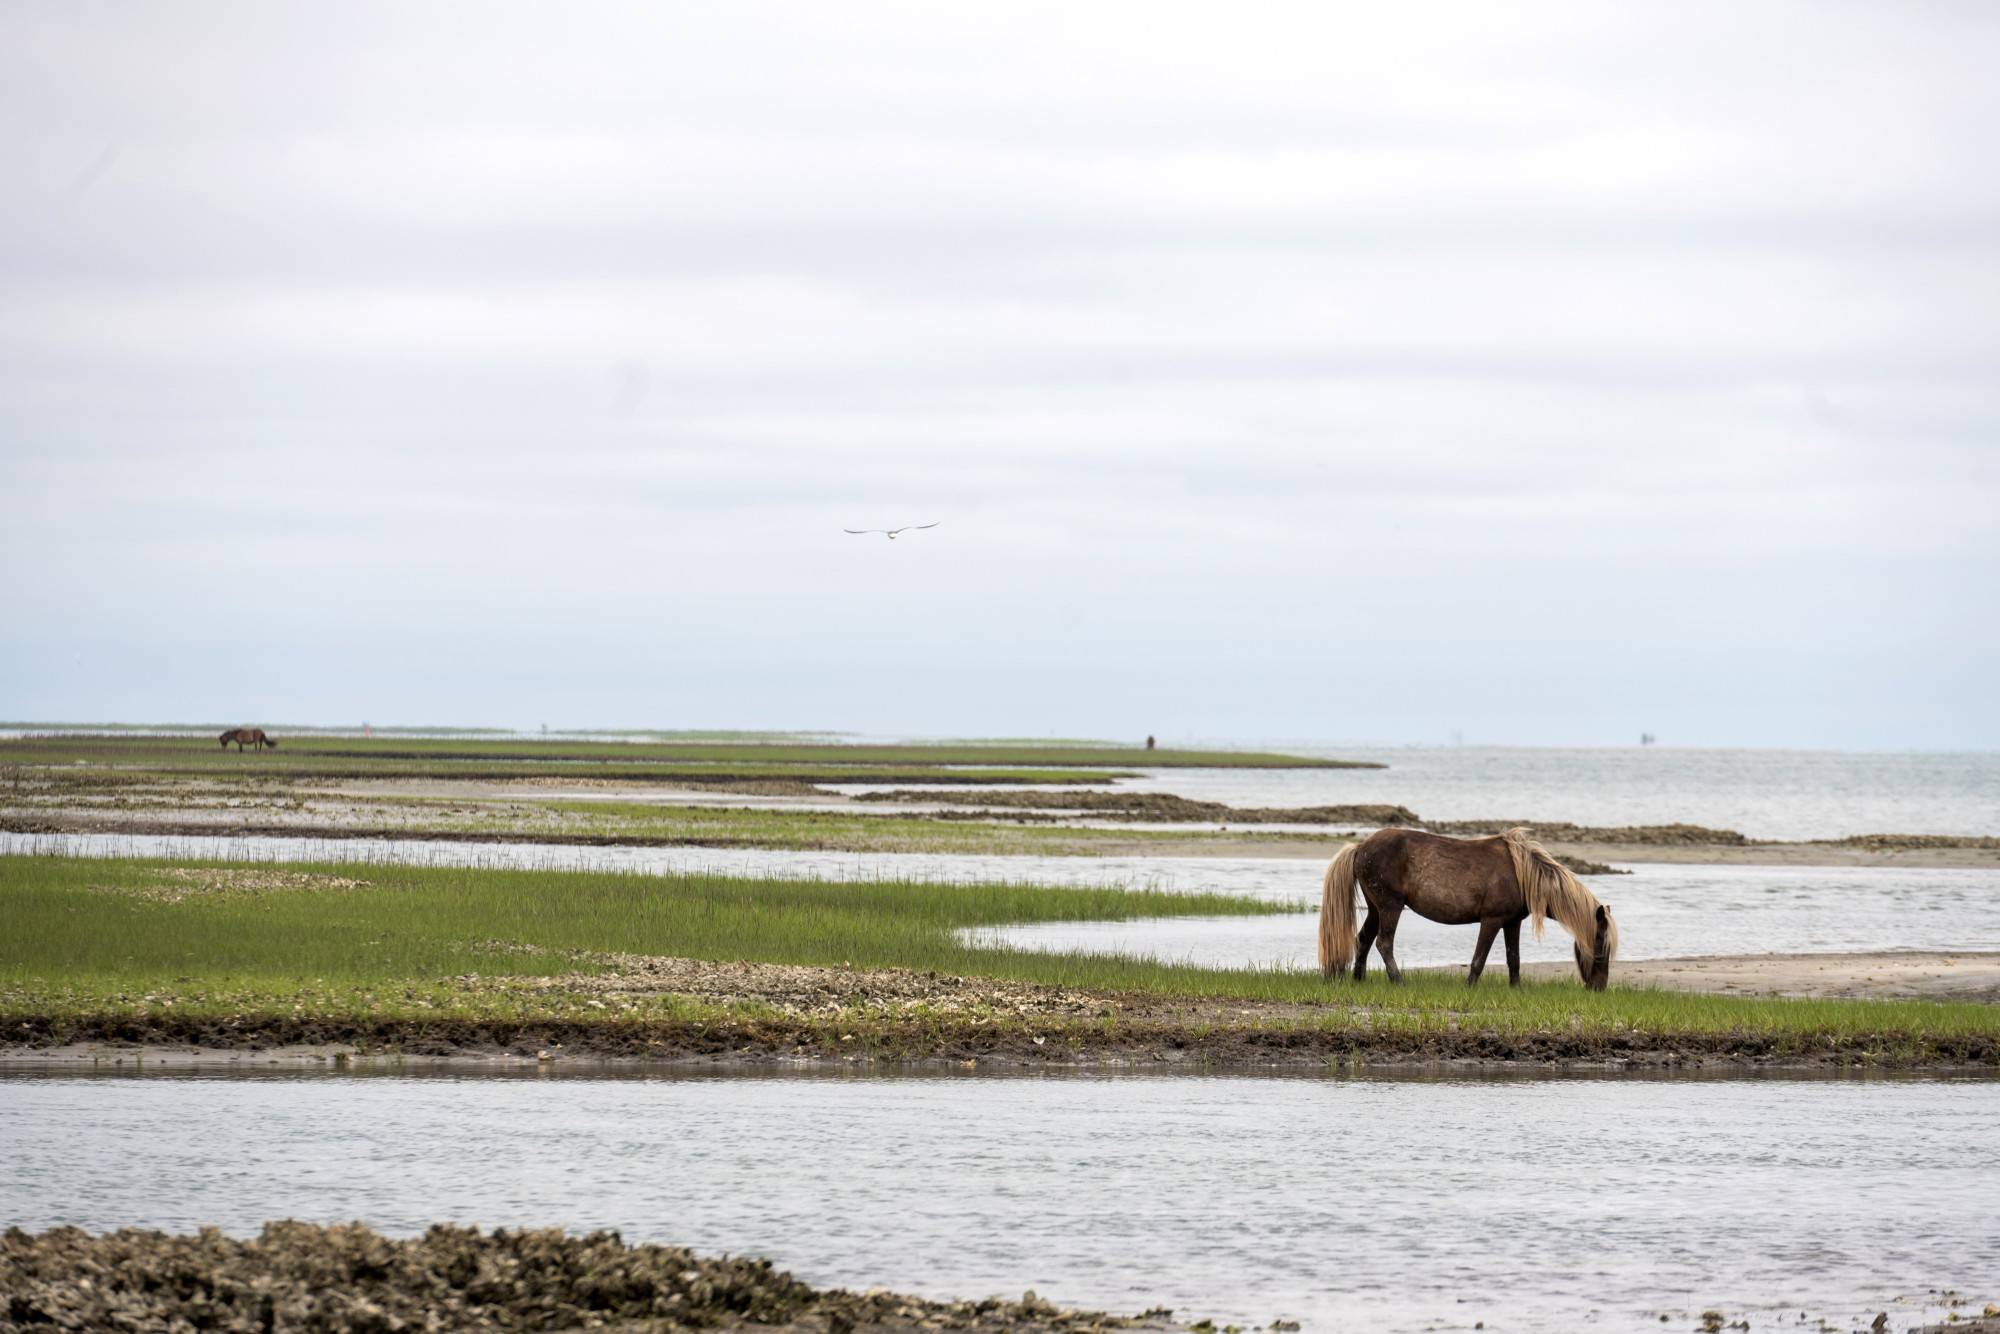 Wild horses roamed at Shackleford Banks where the class camped during the first night of the sea kayaking portion of the trip.